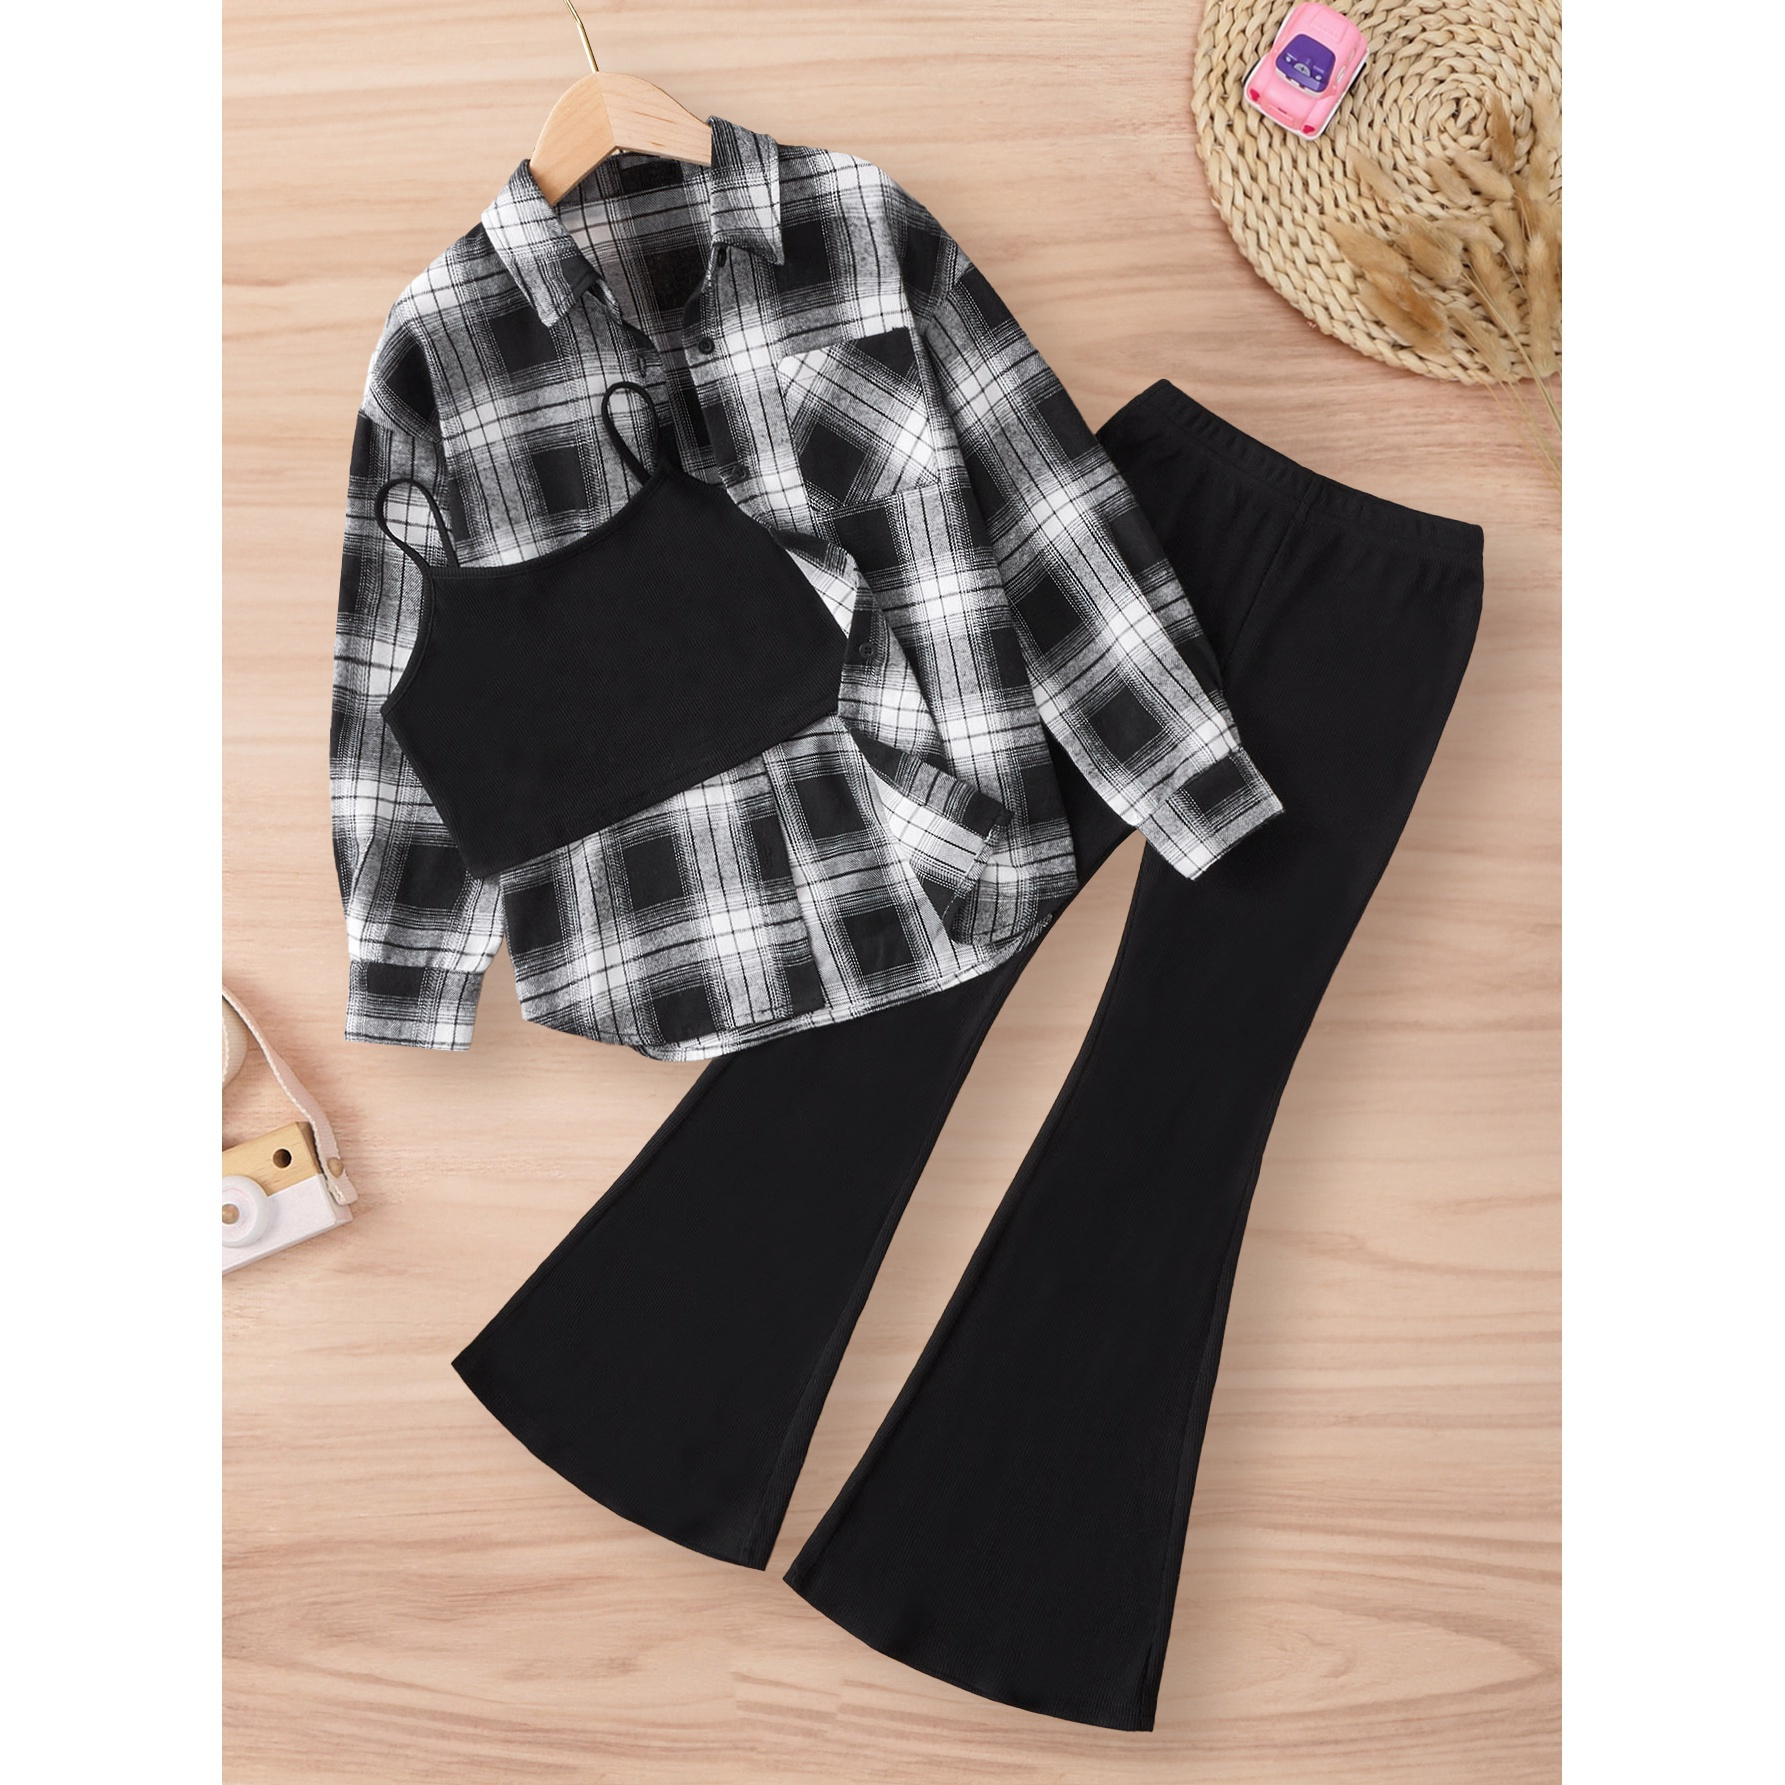 

3pcs, Girls Plaid Long Sleeve Shirt + Cami Top + Flare Pants Set, Classic Casual Outfits For Outdoor Party